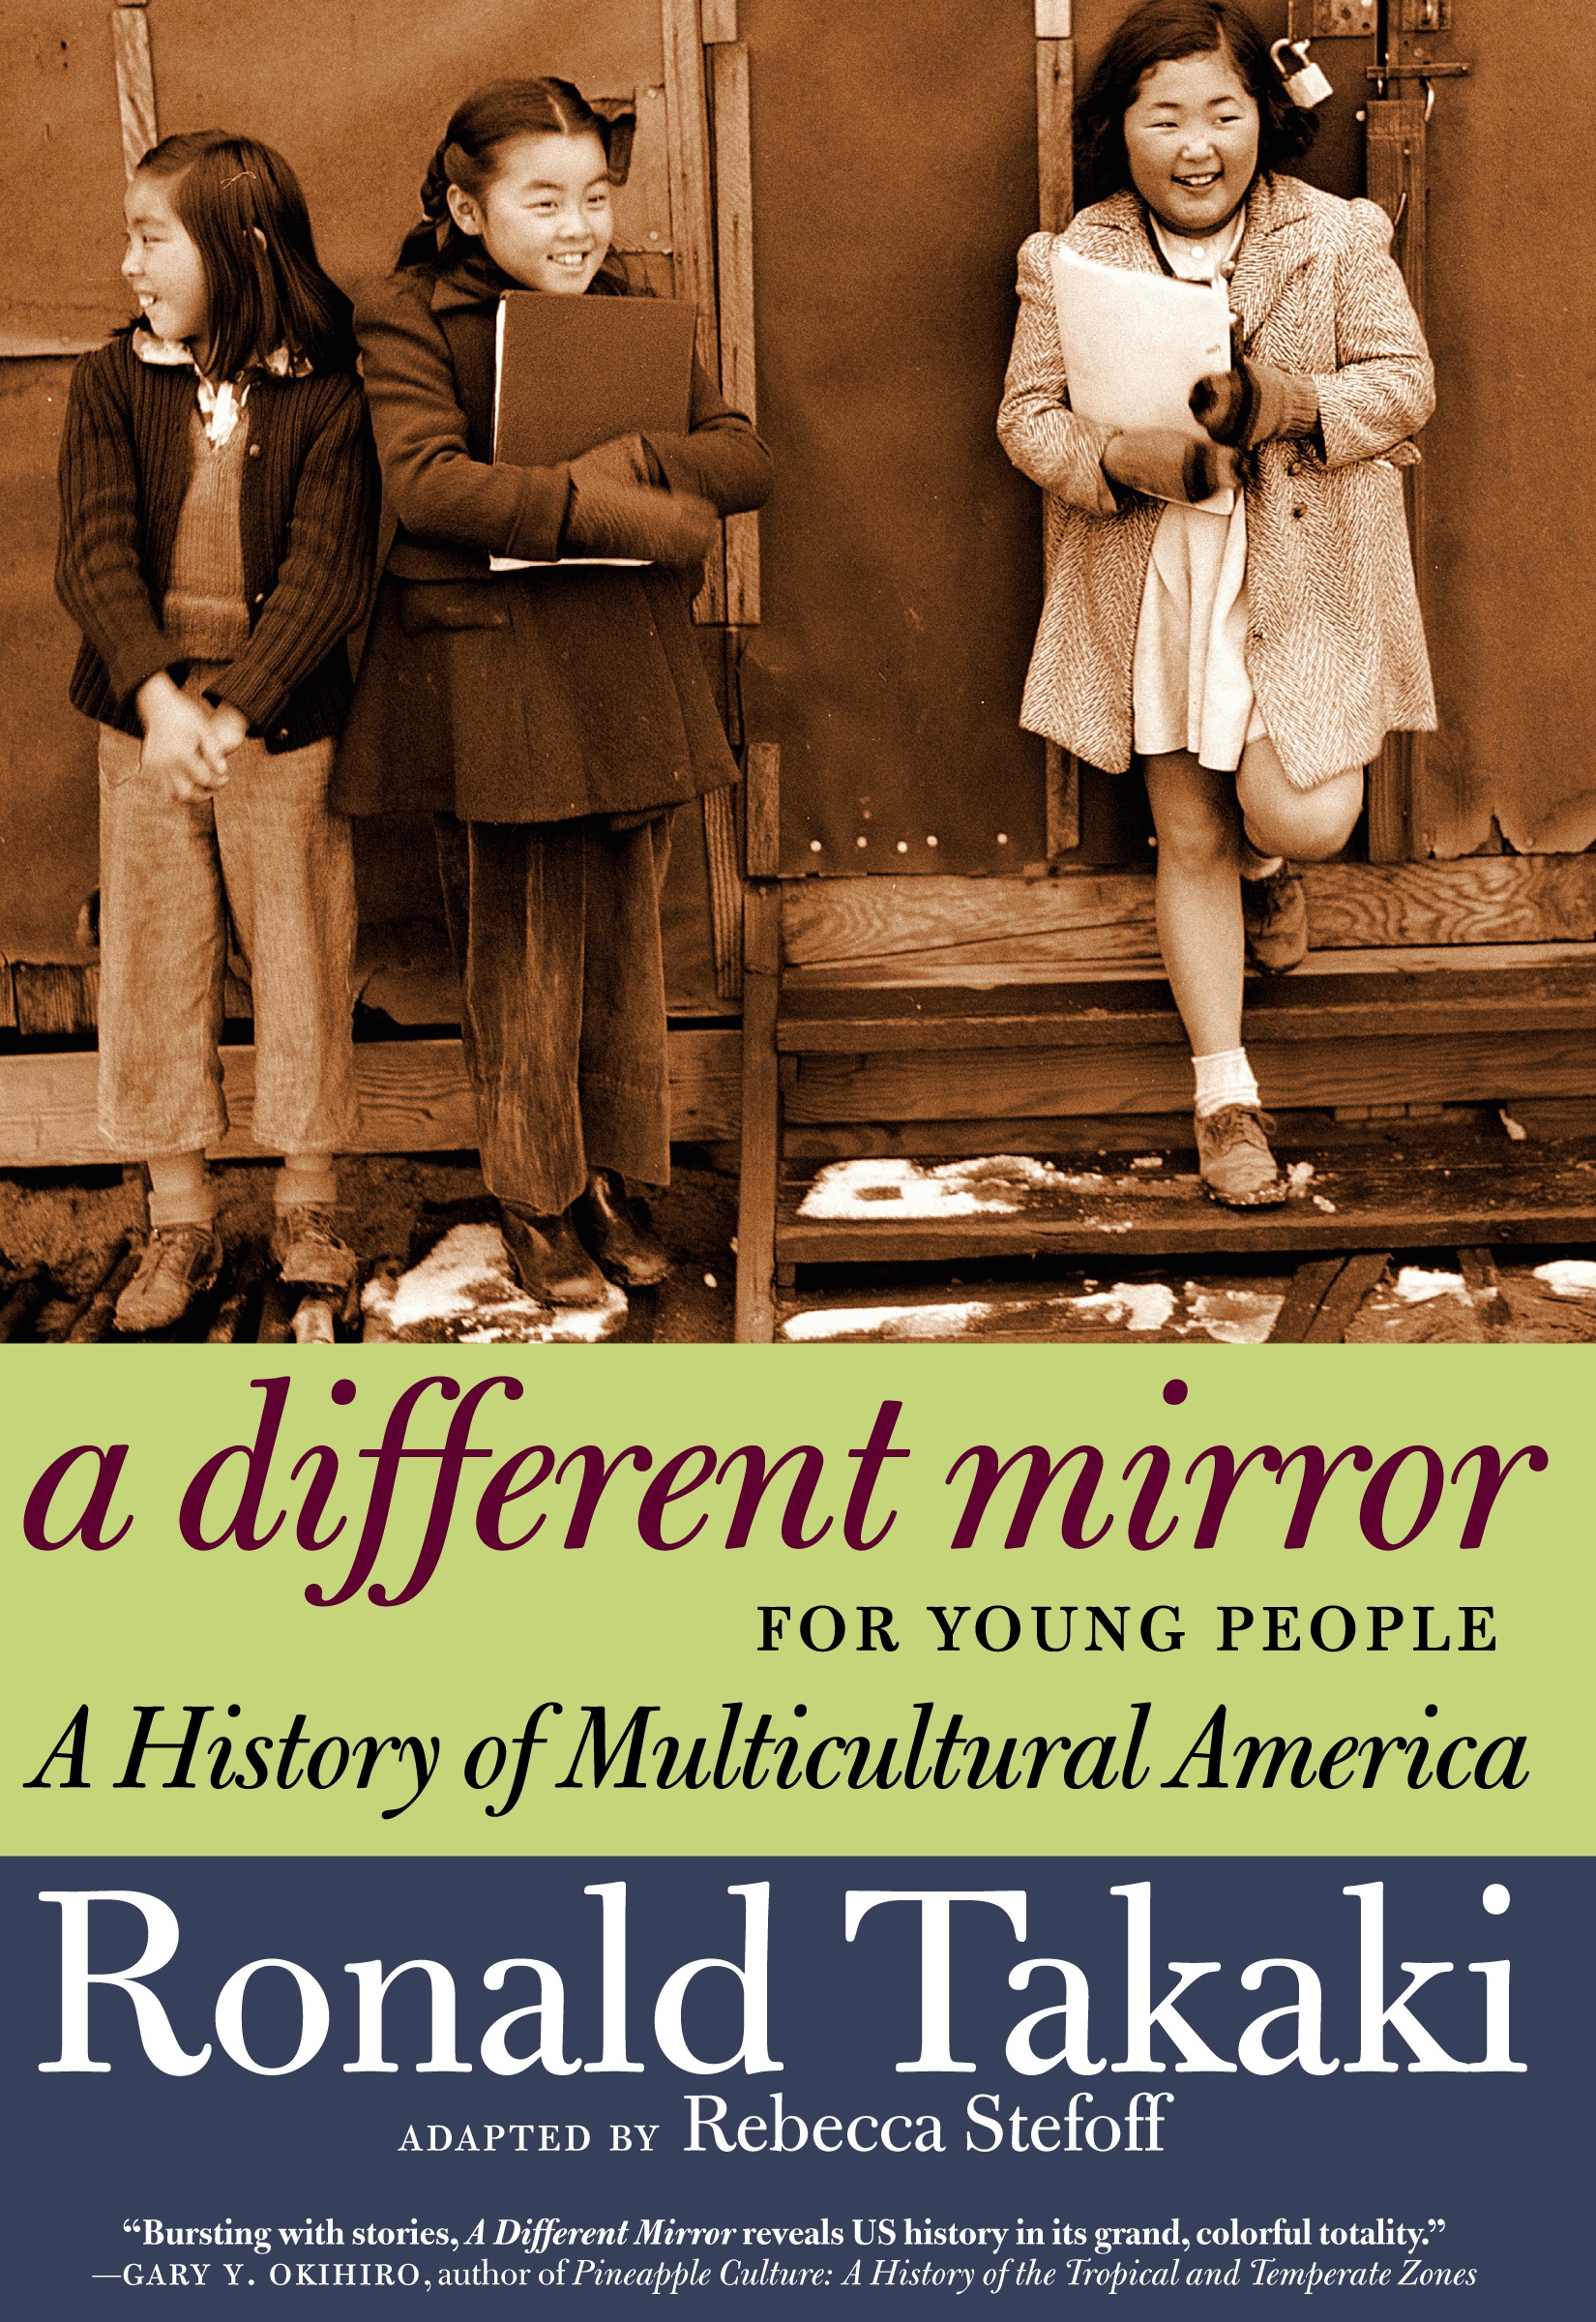 A Different Mirror for Young People